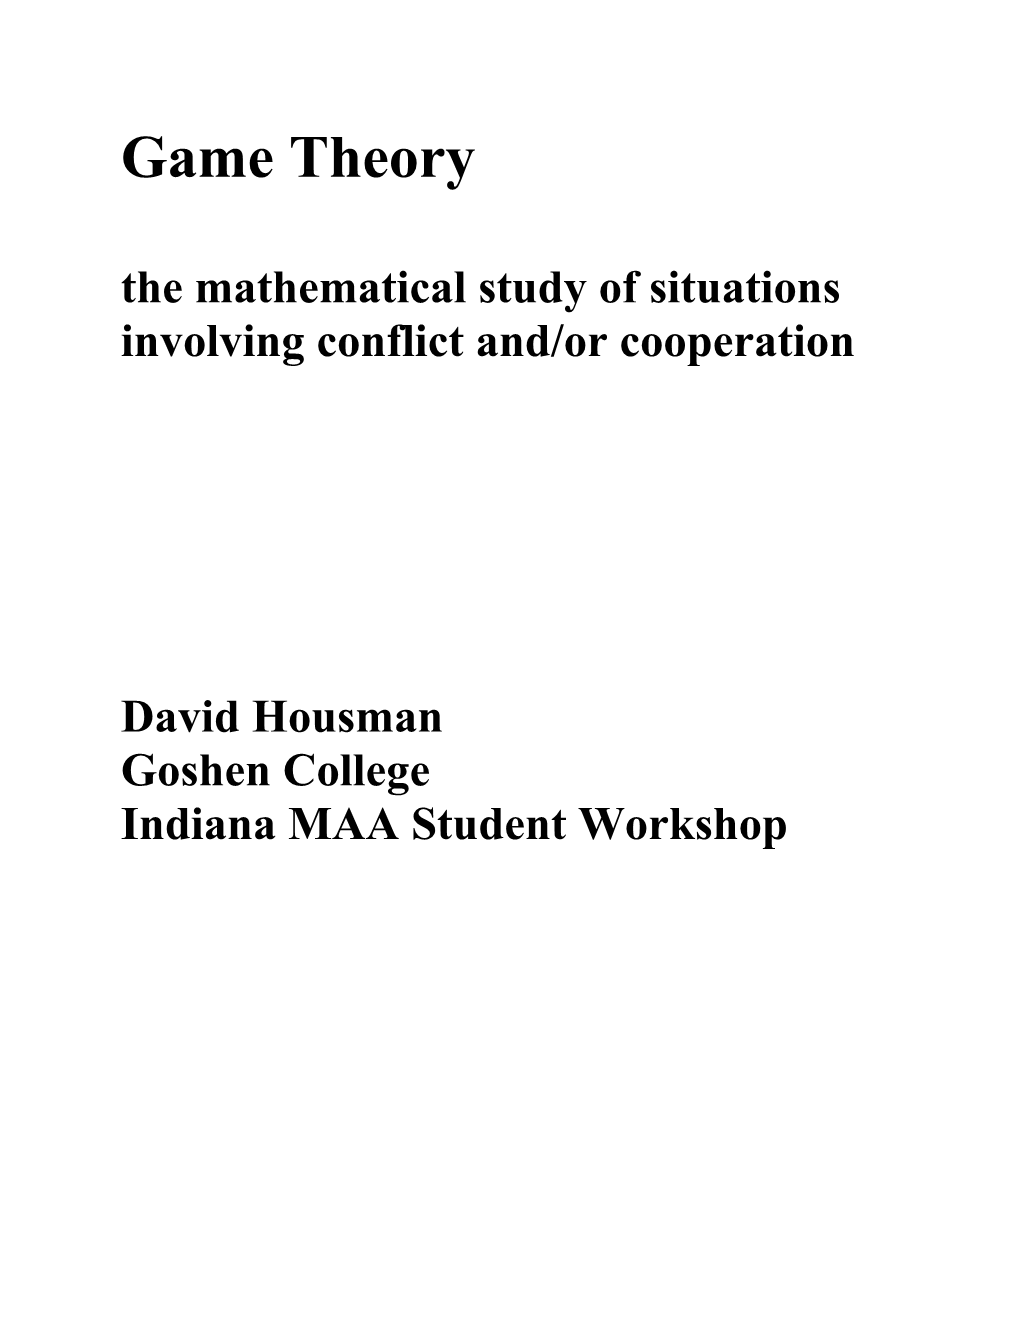 The Mathematical Study of Situations Involving Conflict And/Or Cooperation